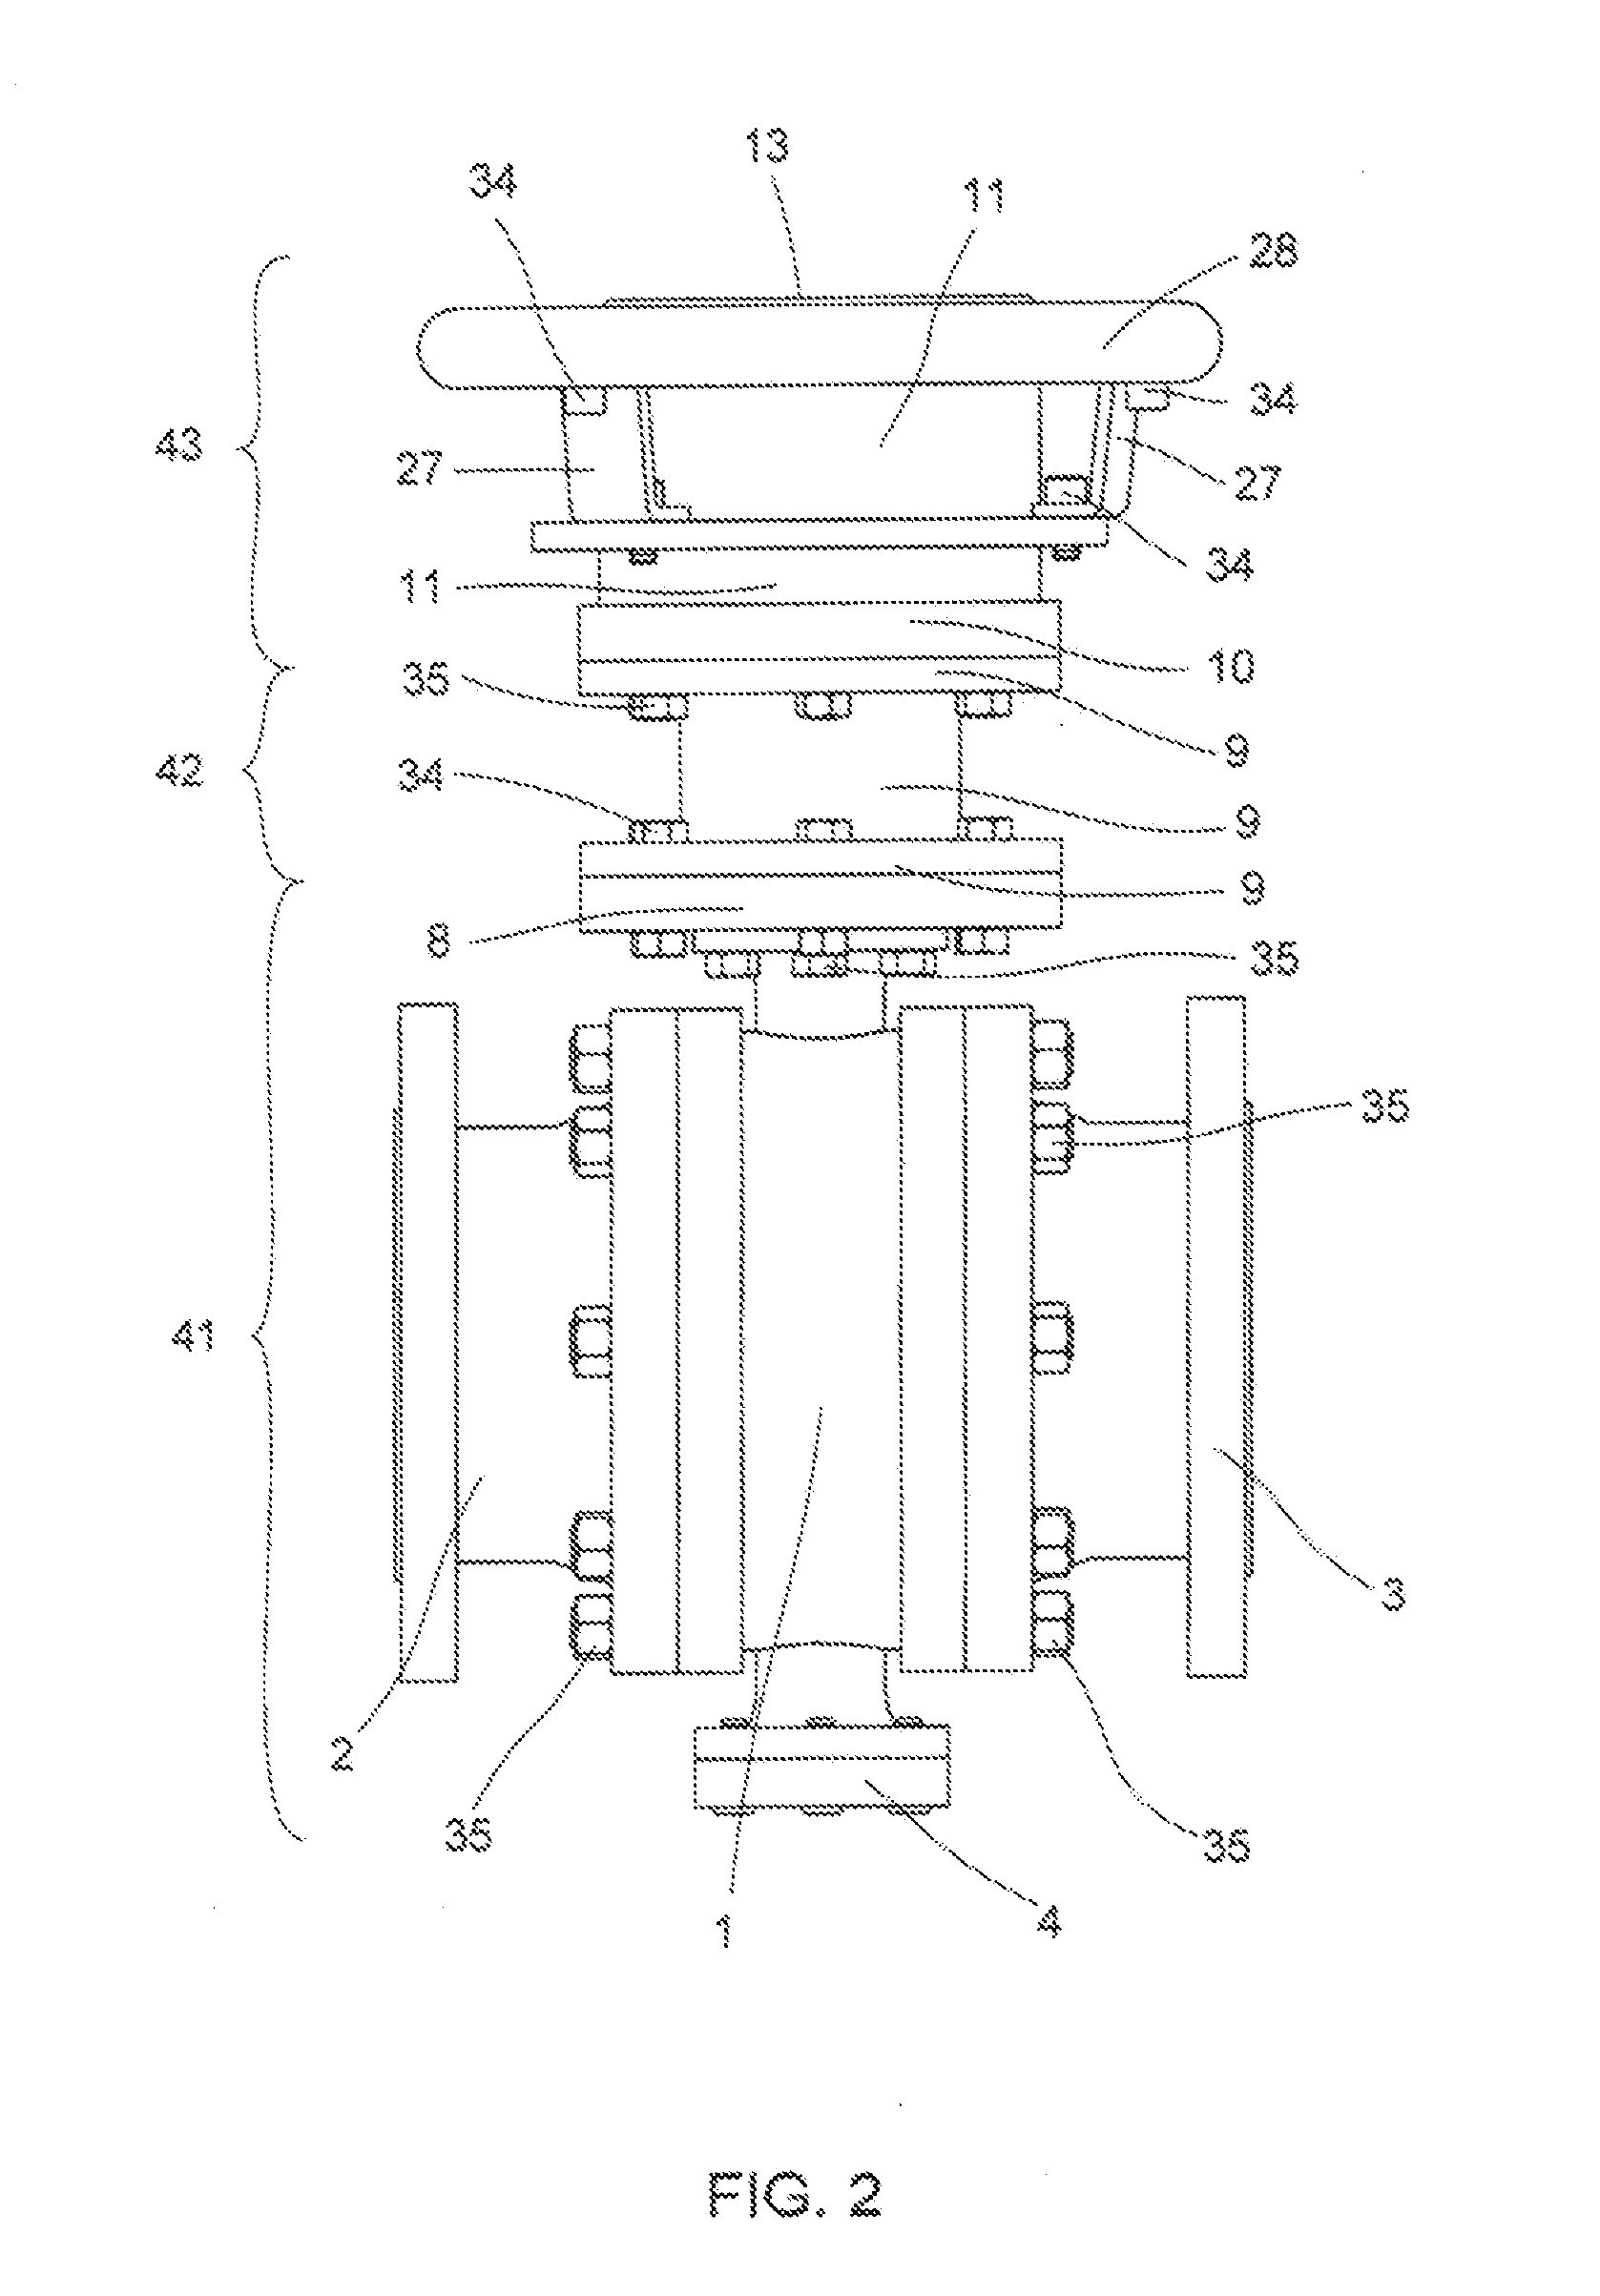 Rotary valve adapter assembly with planetary gear system